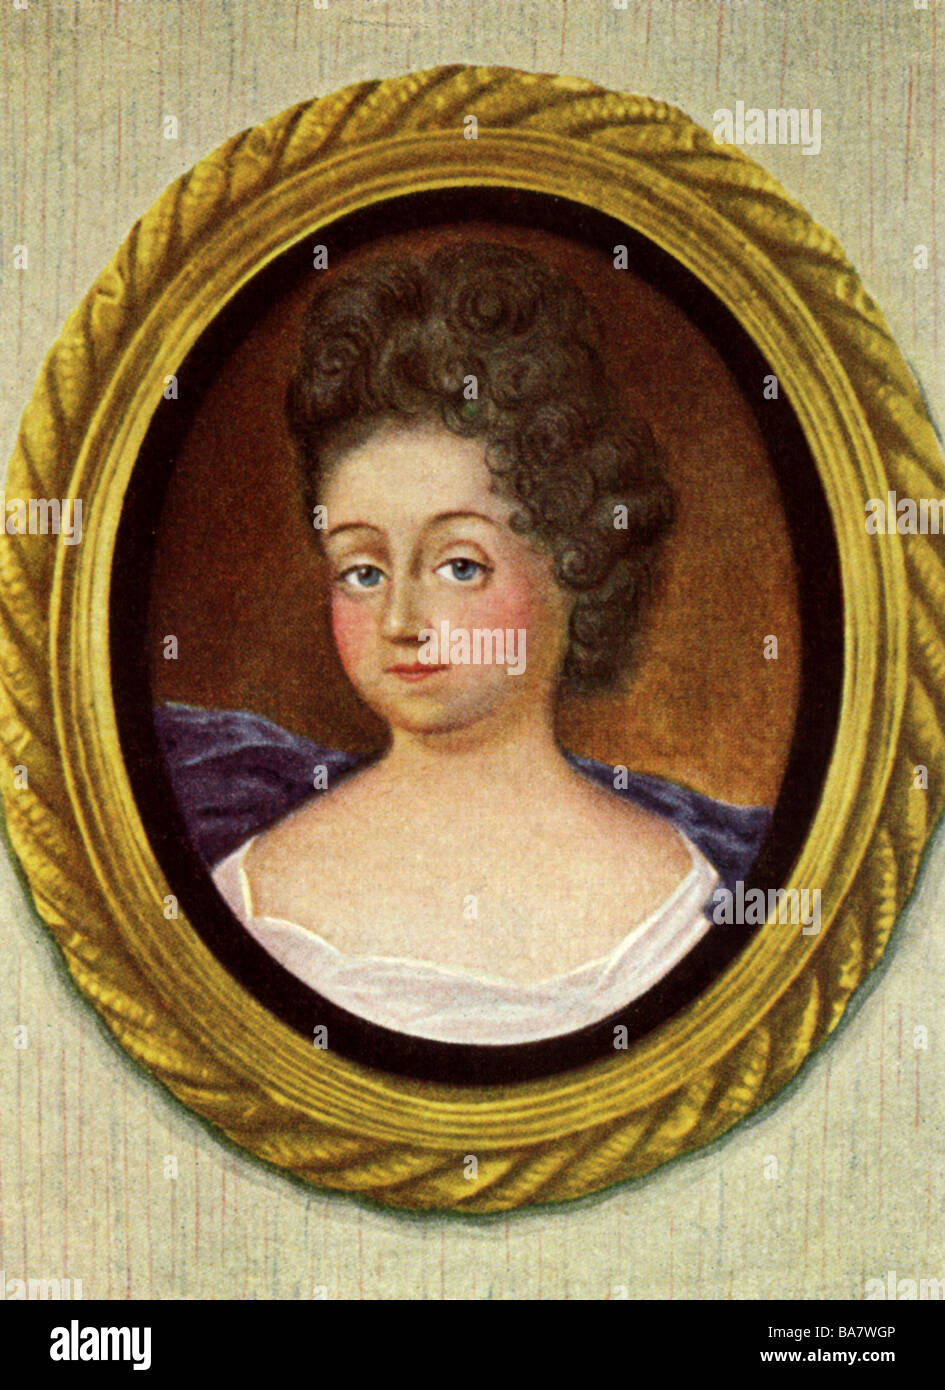 Koenigsmarck, Philip Christoph Count of, 14.3.1665 - 11.7.1694, German author / writer, mistress of Elector Frederick Augustus I of Saxony, portrait, colour print after contemporary miniature, Stock Photo